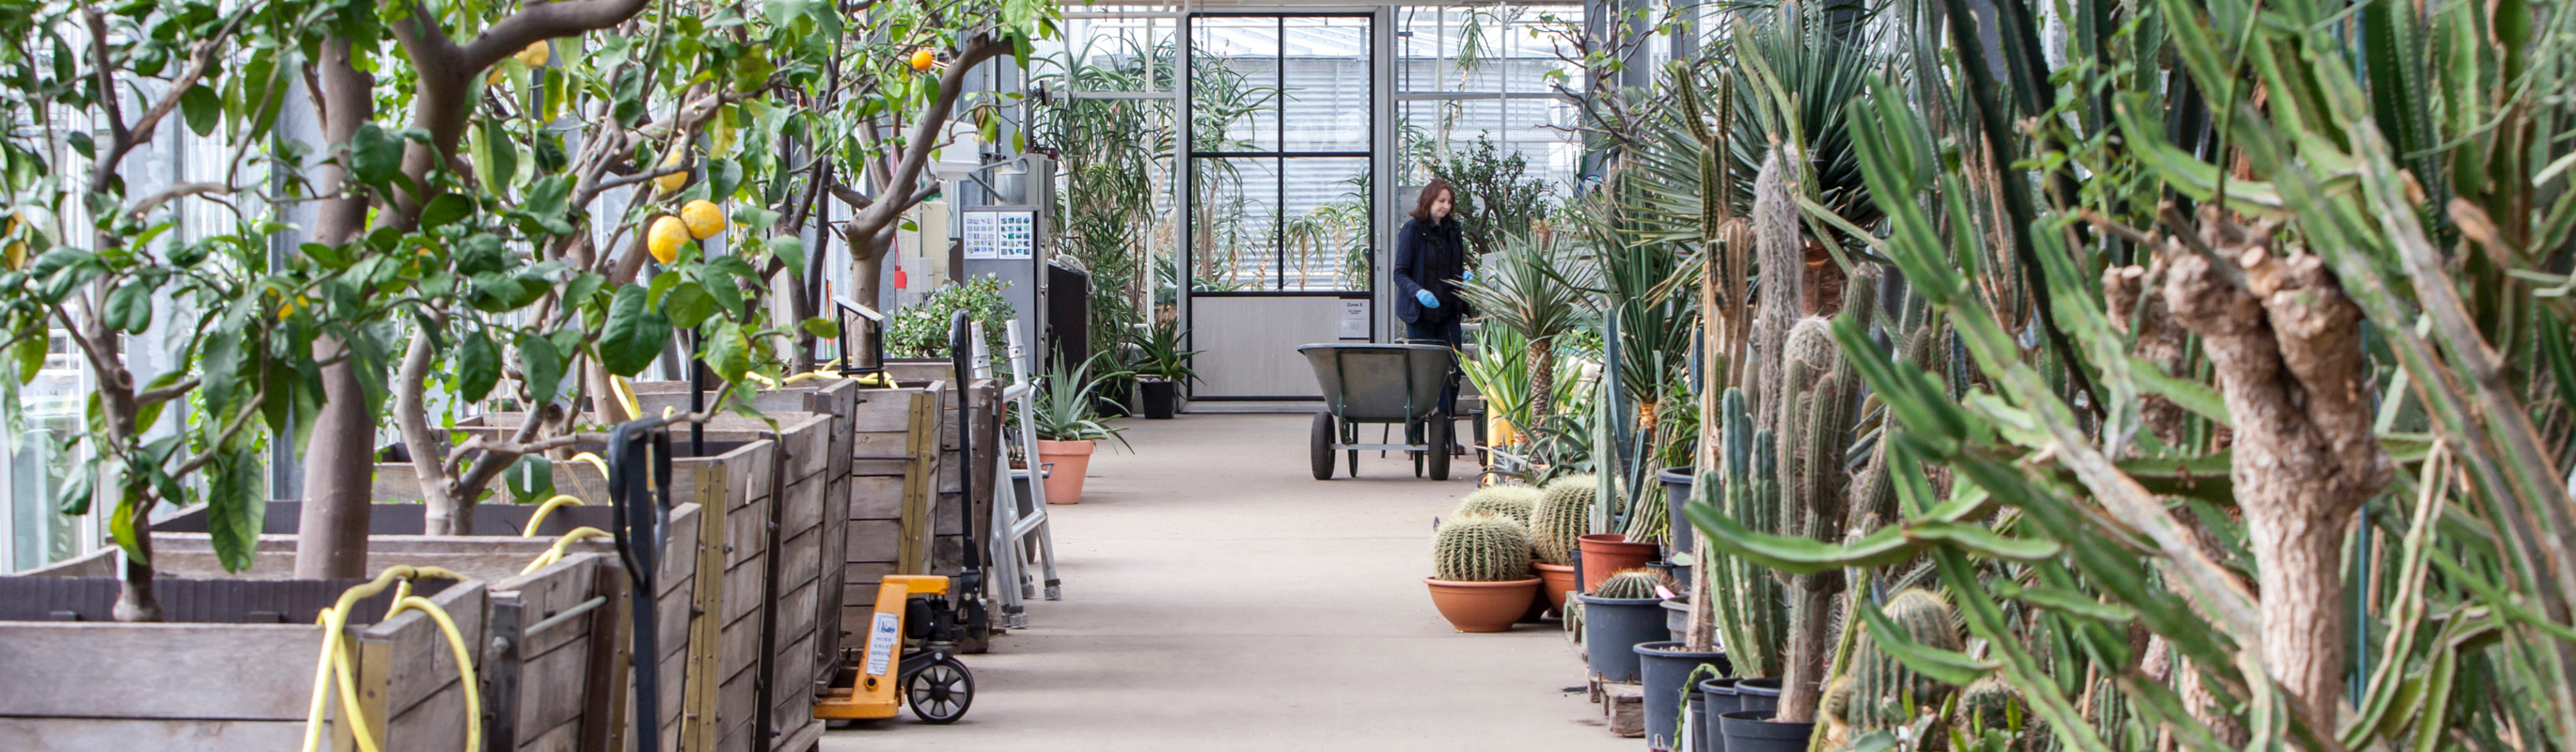 A horticulturalist tends to plants in a nursery